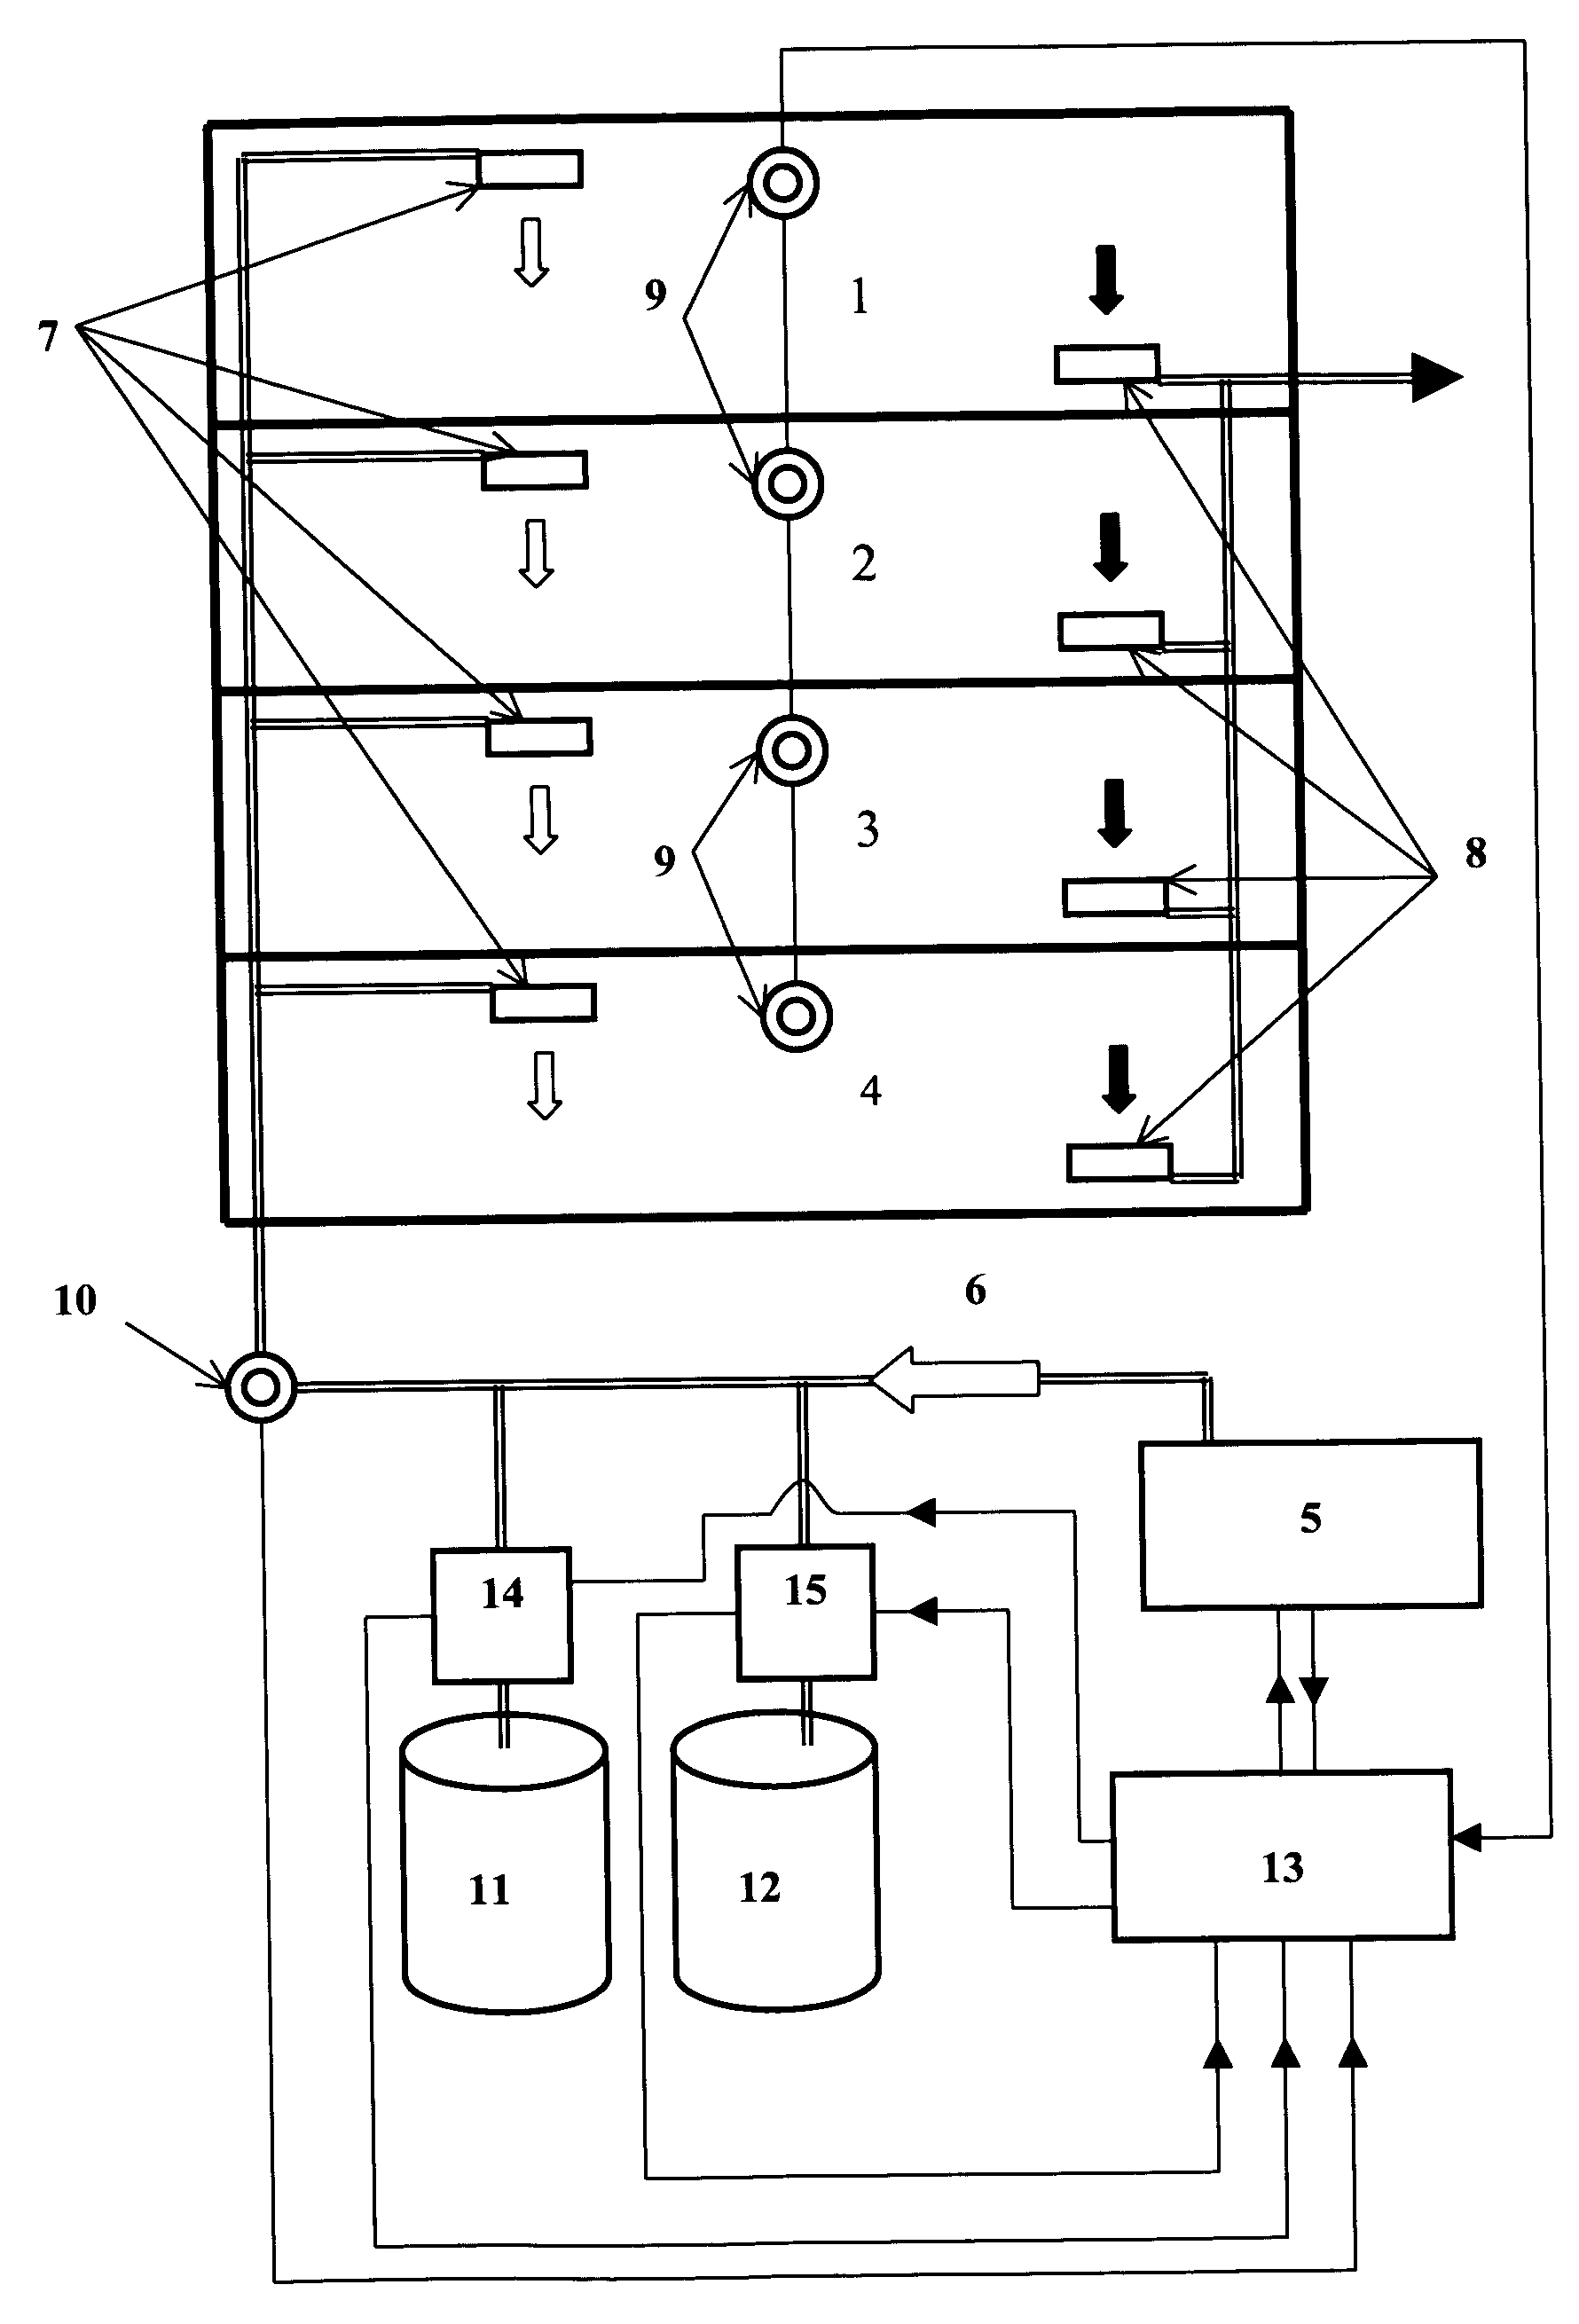 Method and apparatus for air conditioning